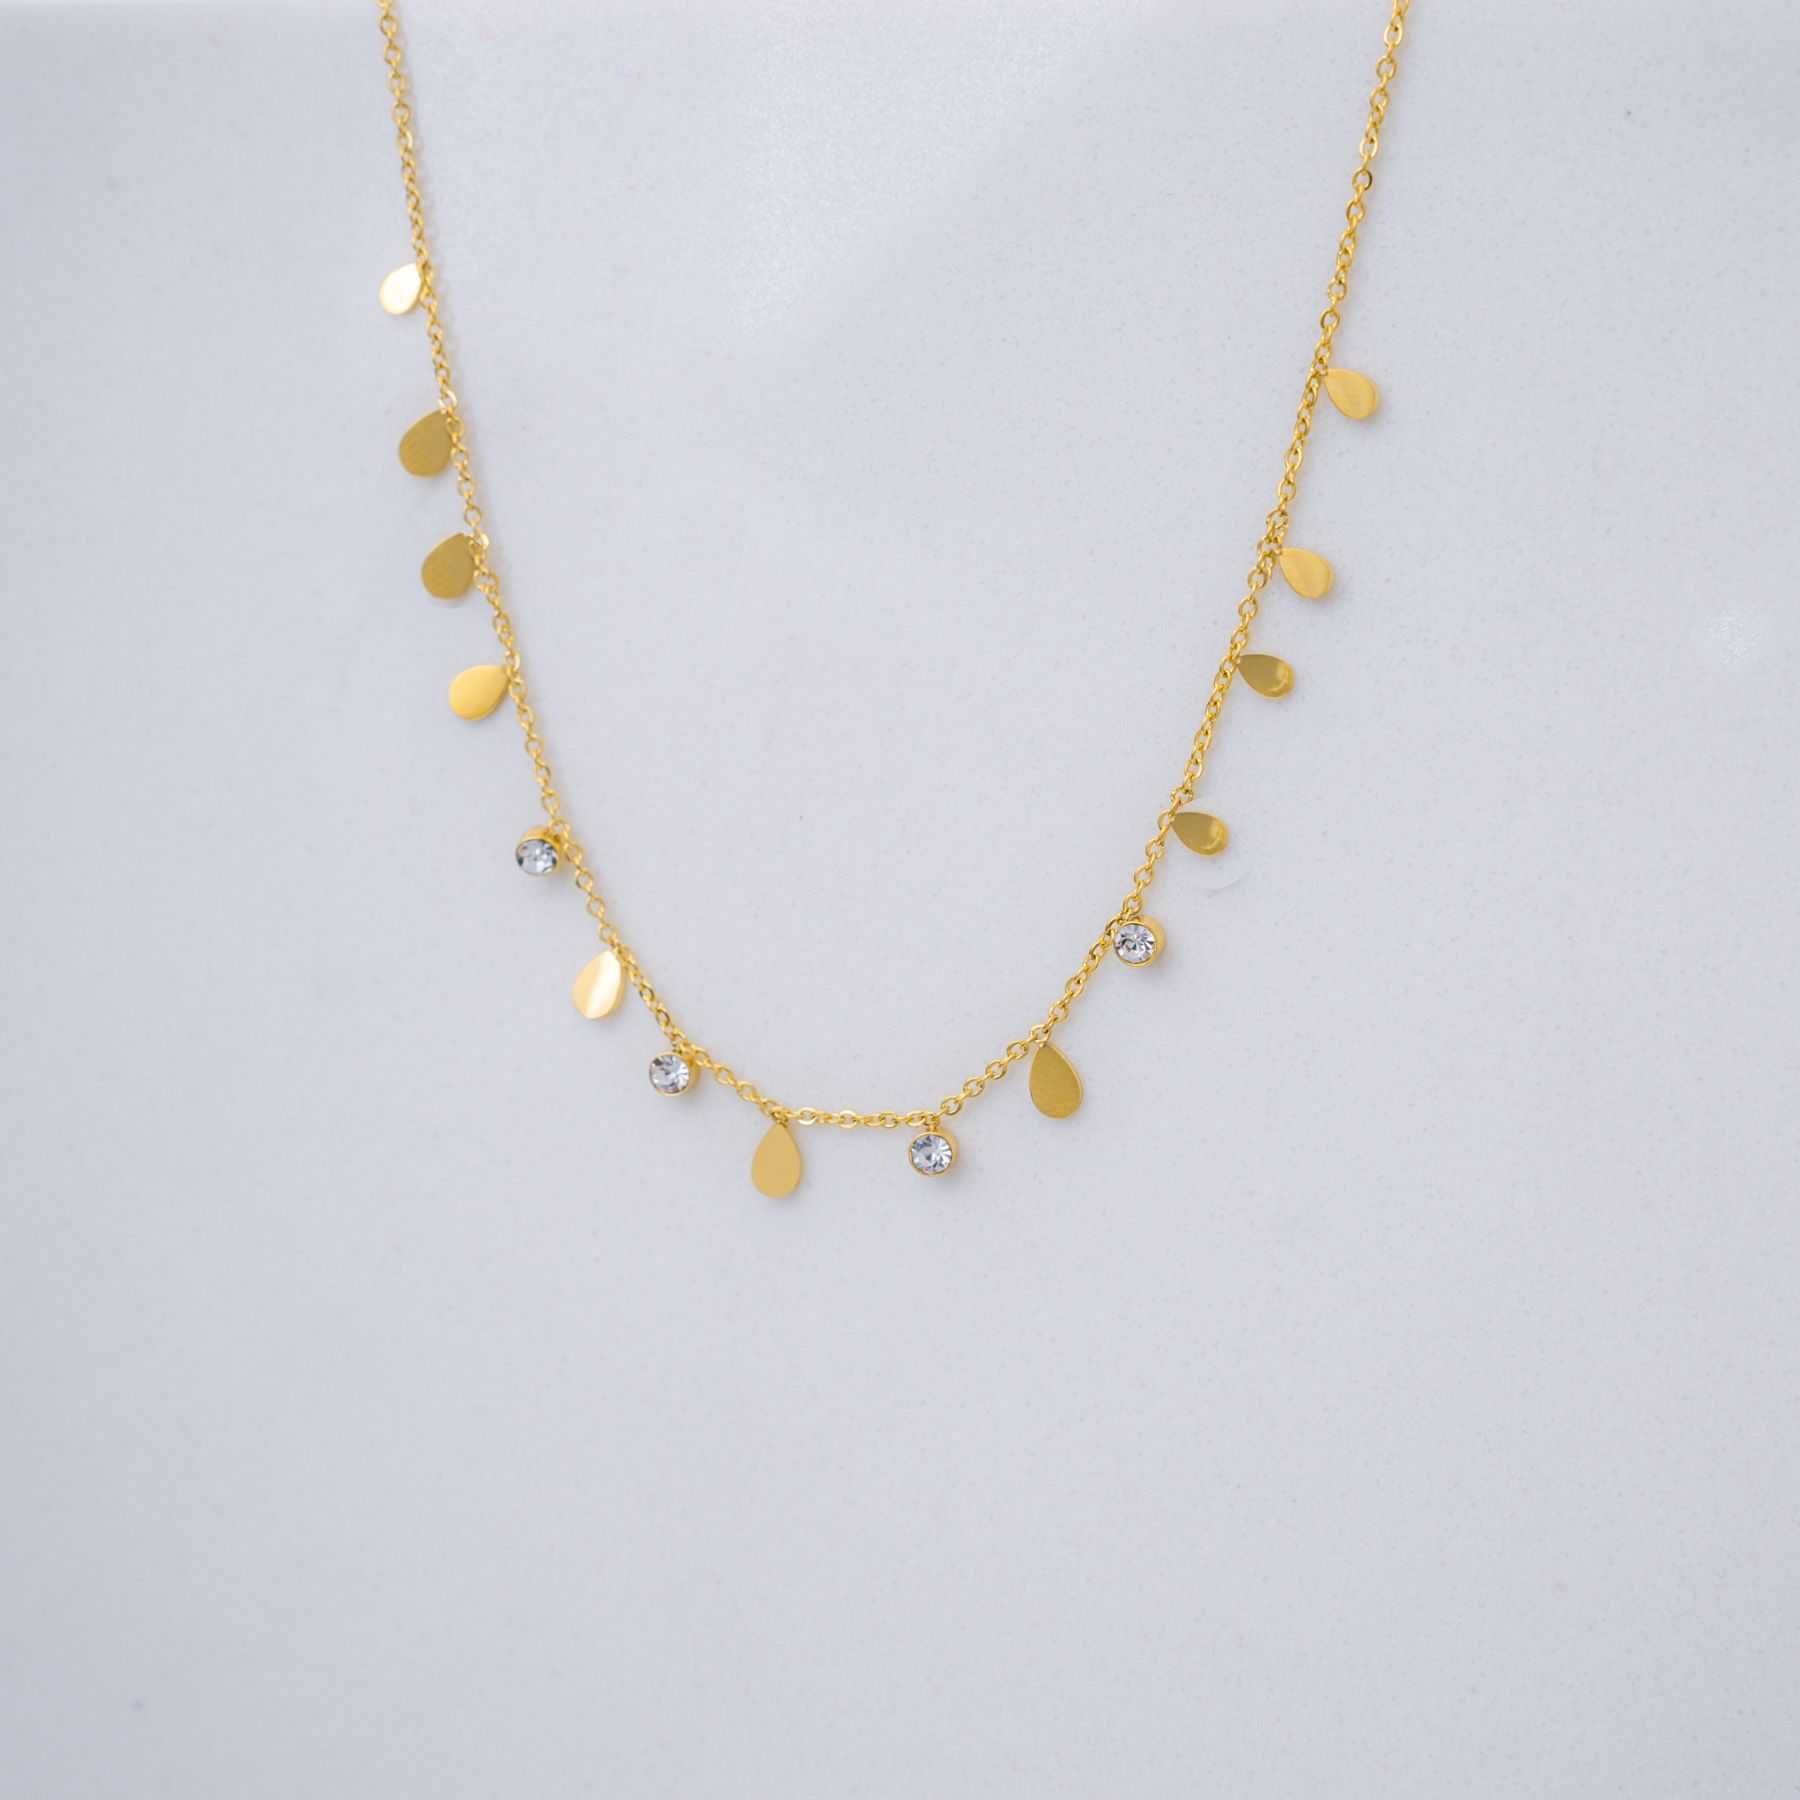 BRITTANY NECKLACE - GOLD